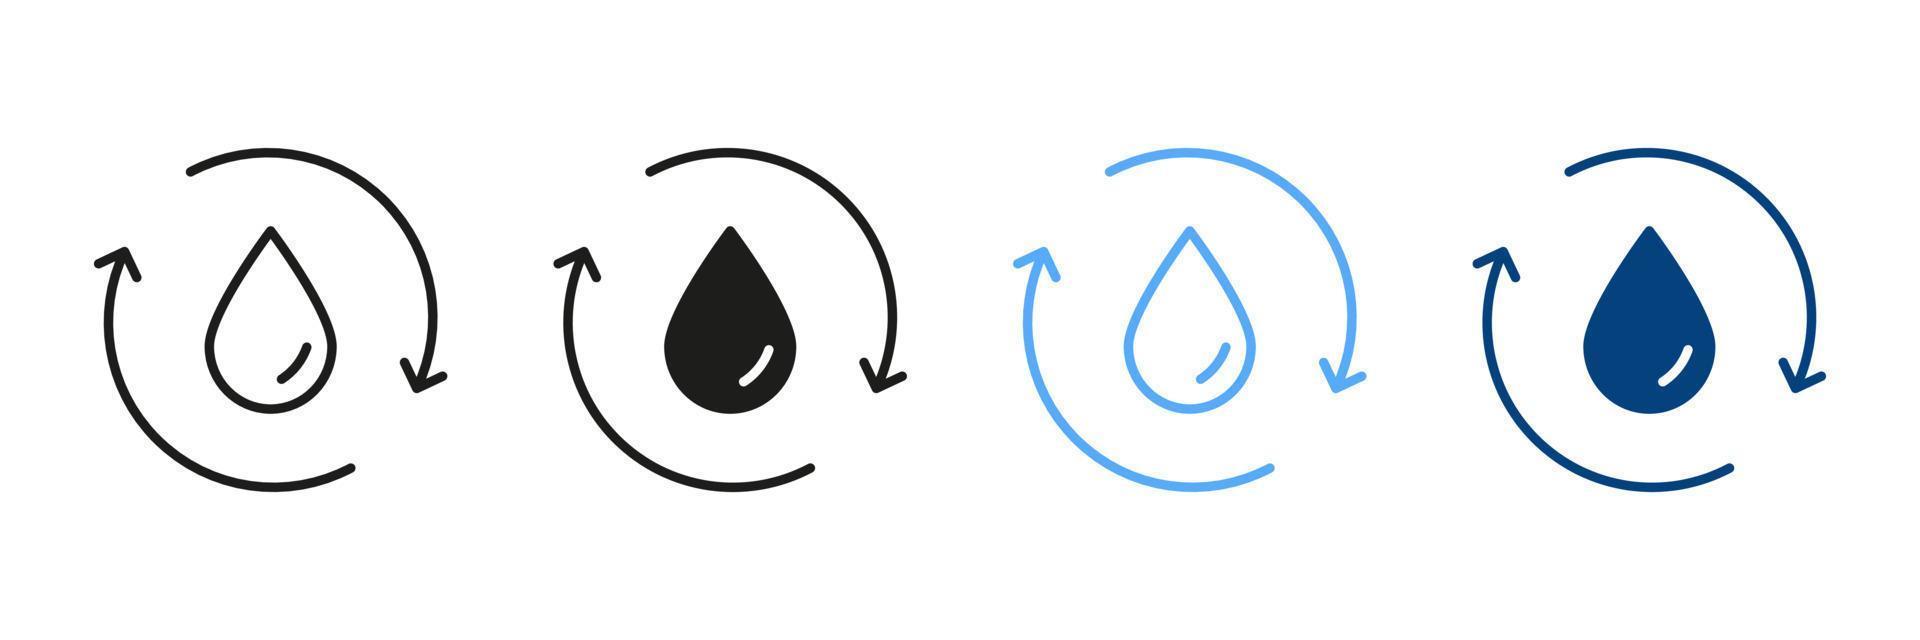 Recycle Black and Color Symbol Collection. Save World Concept. Recycle or Reuse Water Silhouette and Line Icon Set. Water Drop with Circular Arrows. Renew of Liquid. Vector Isolated Illustration.